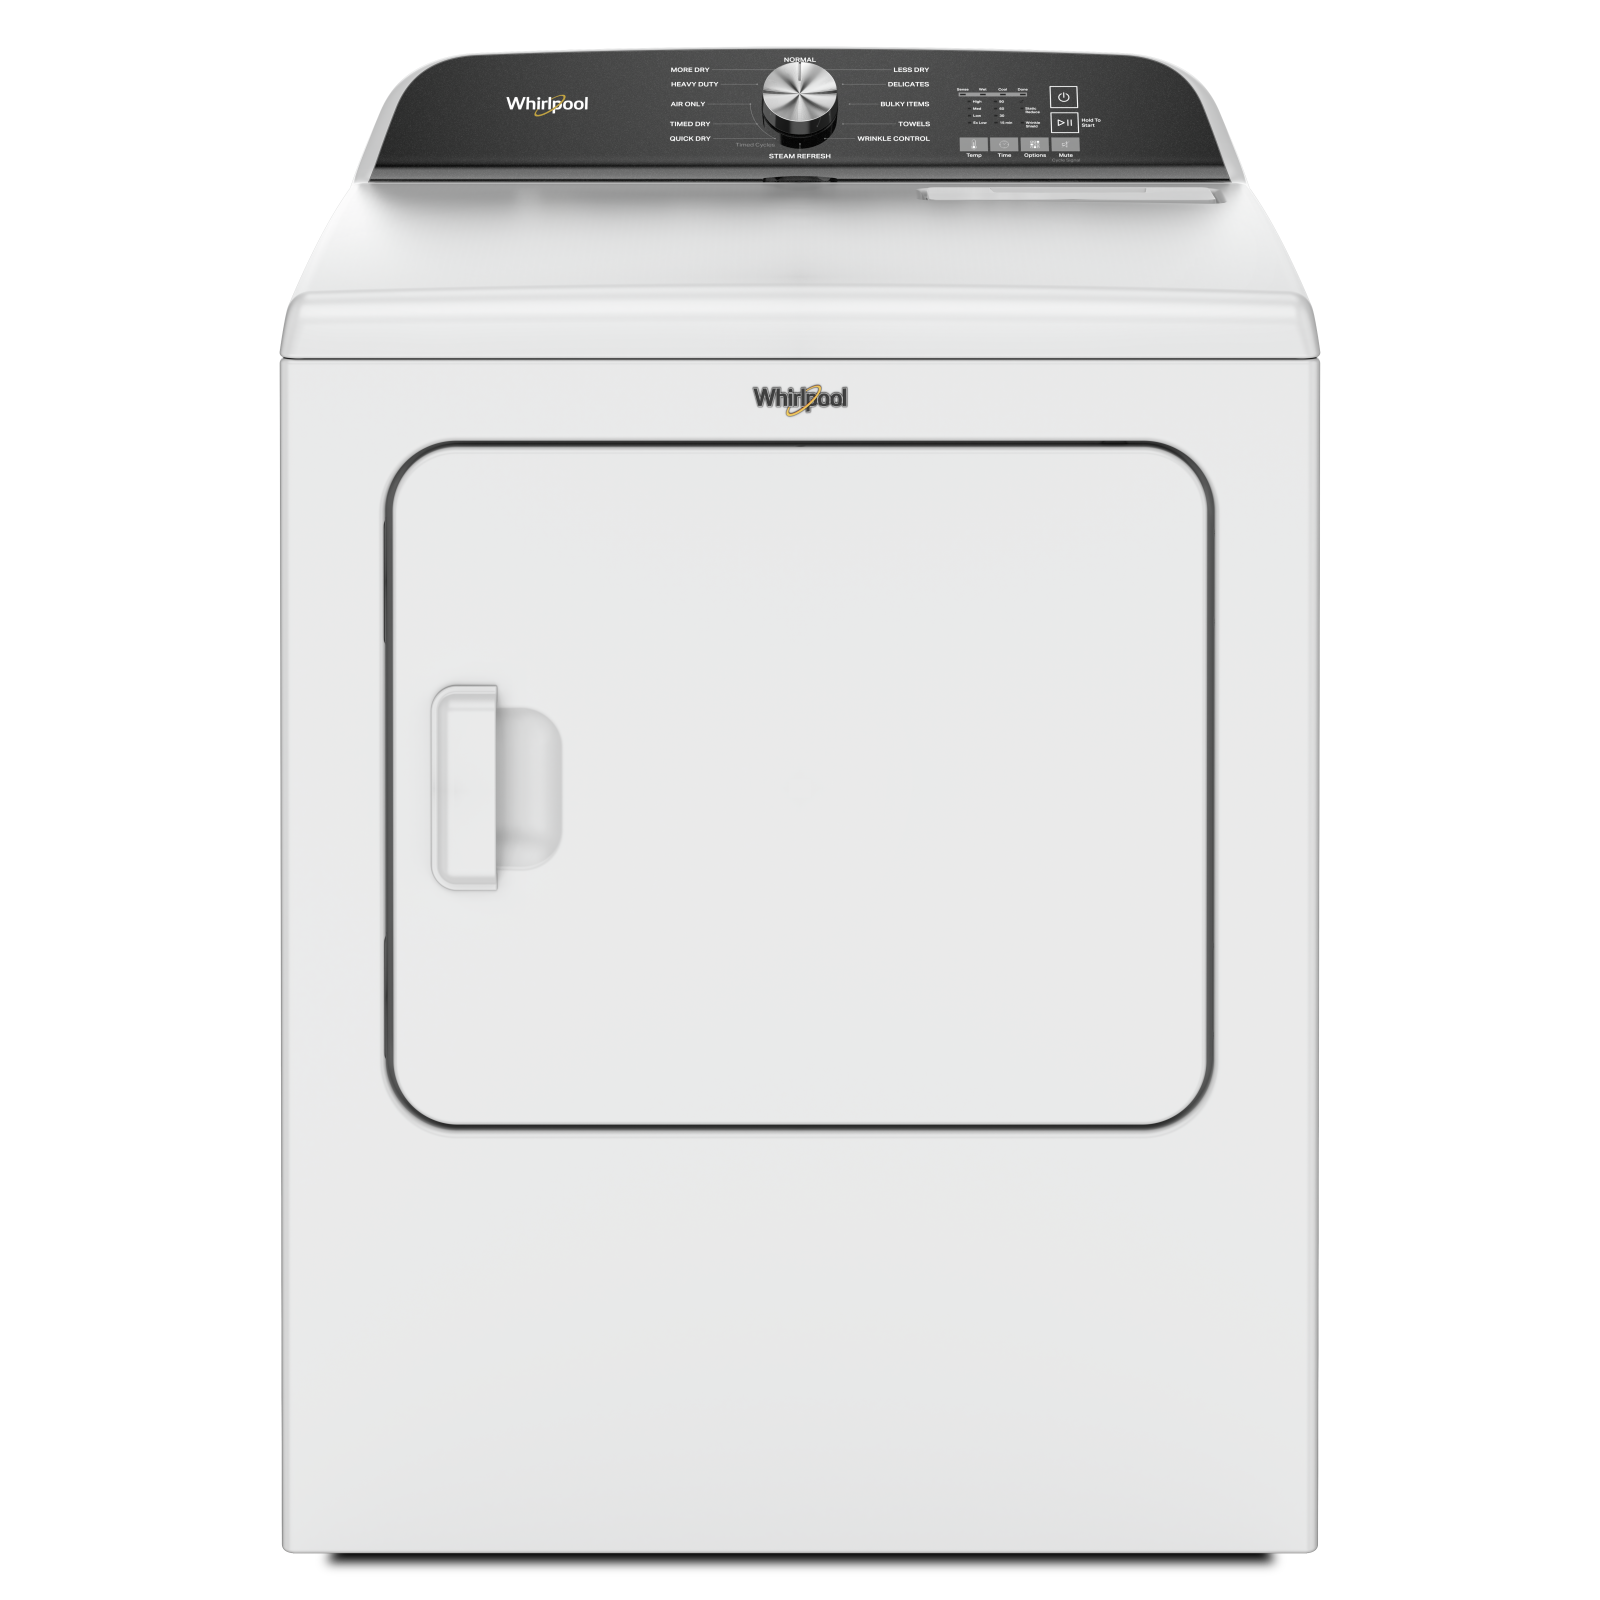 Whirlpool - 7 cu. Ft  Electric Dryer in White - YWED6150PW